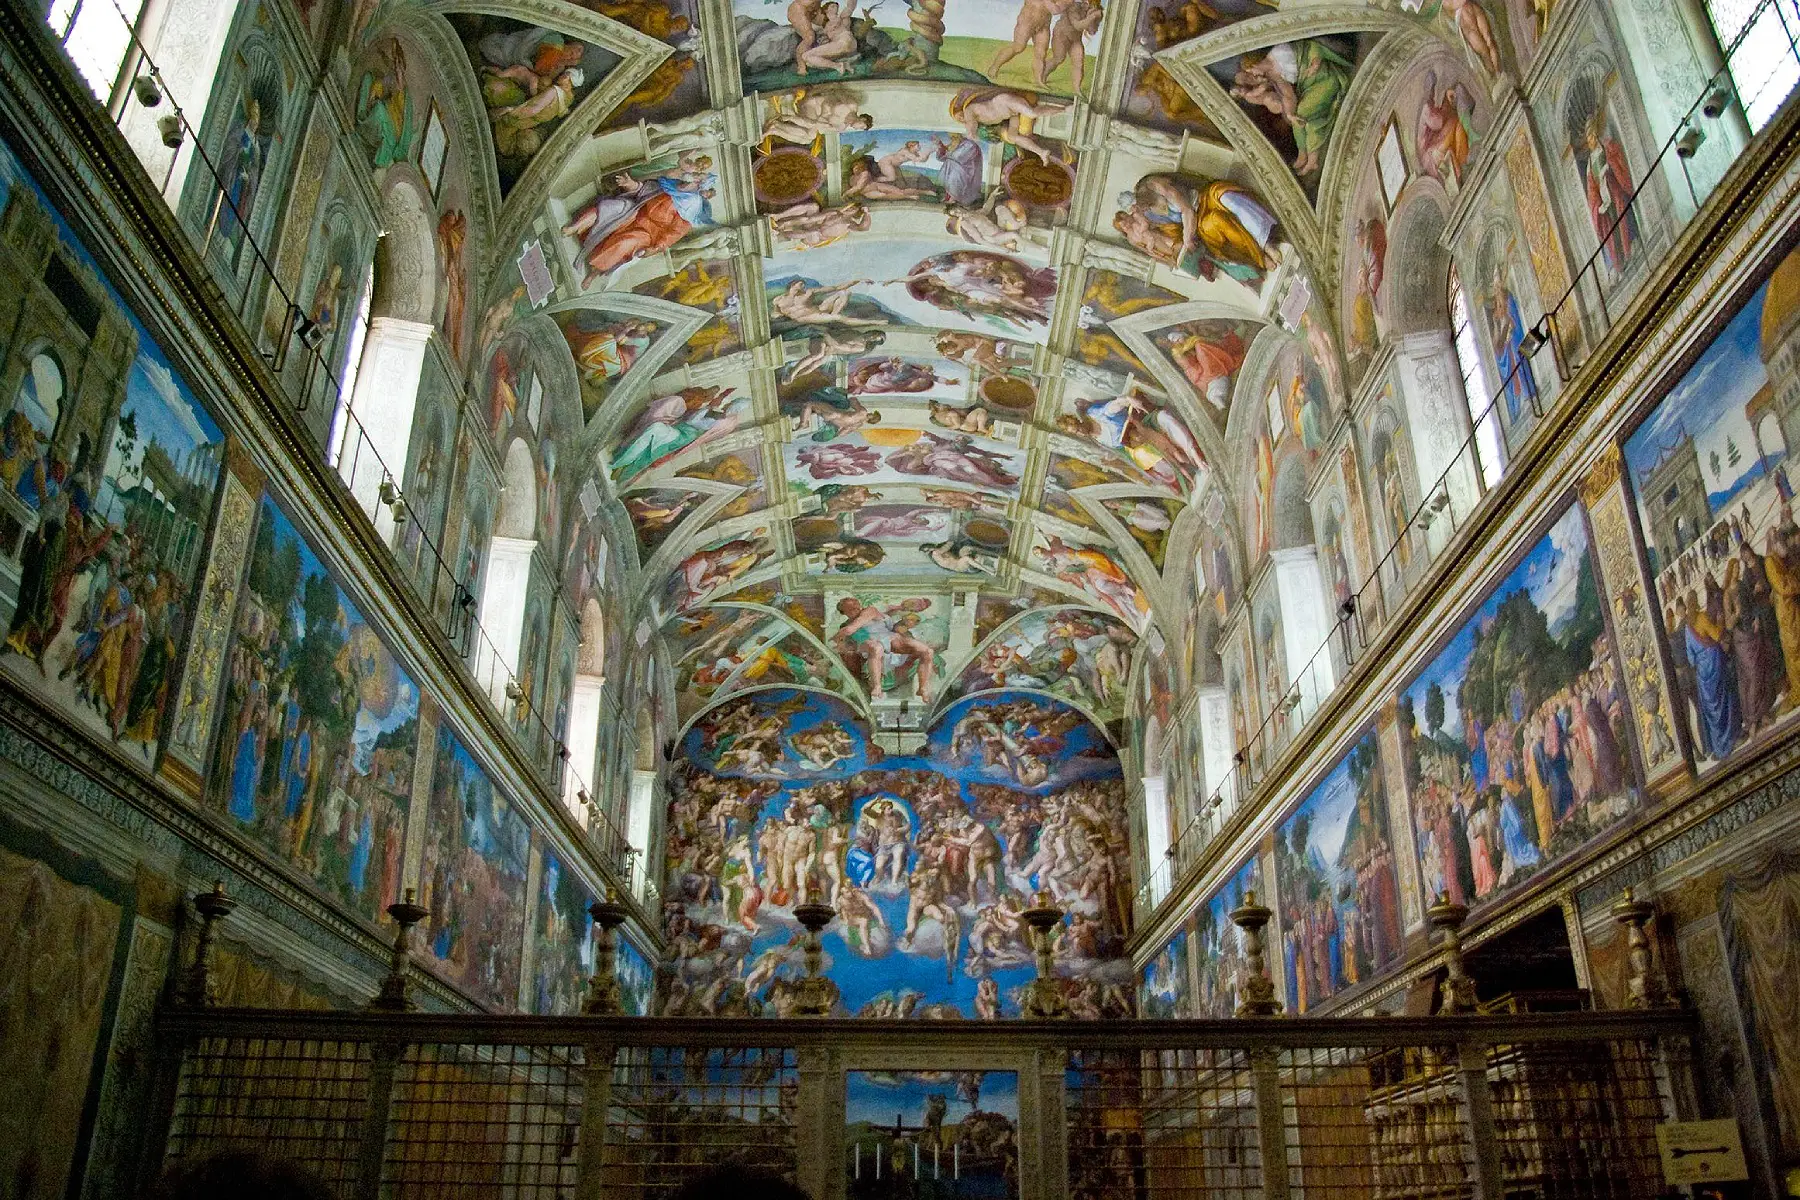 The famous ceiling of the Sistine Chapel in Rome, Italy.